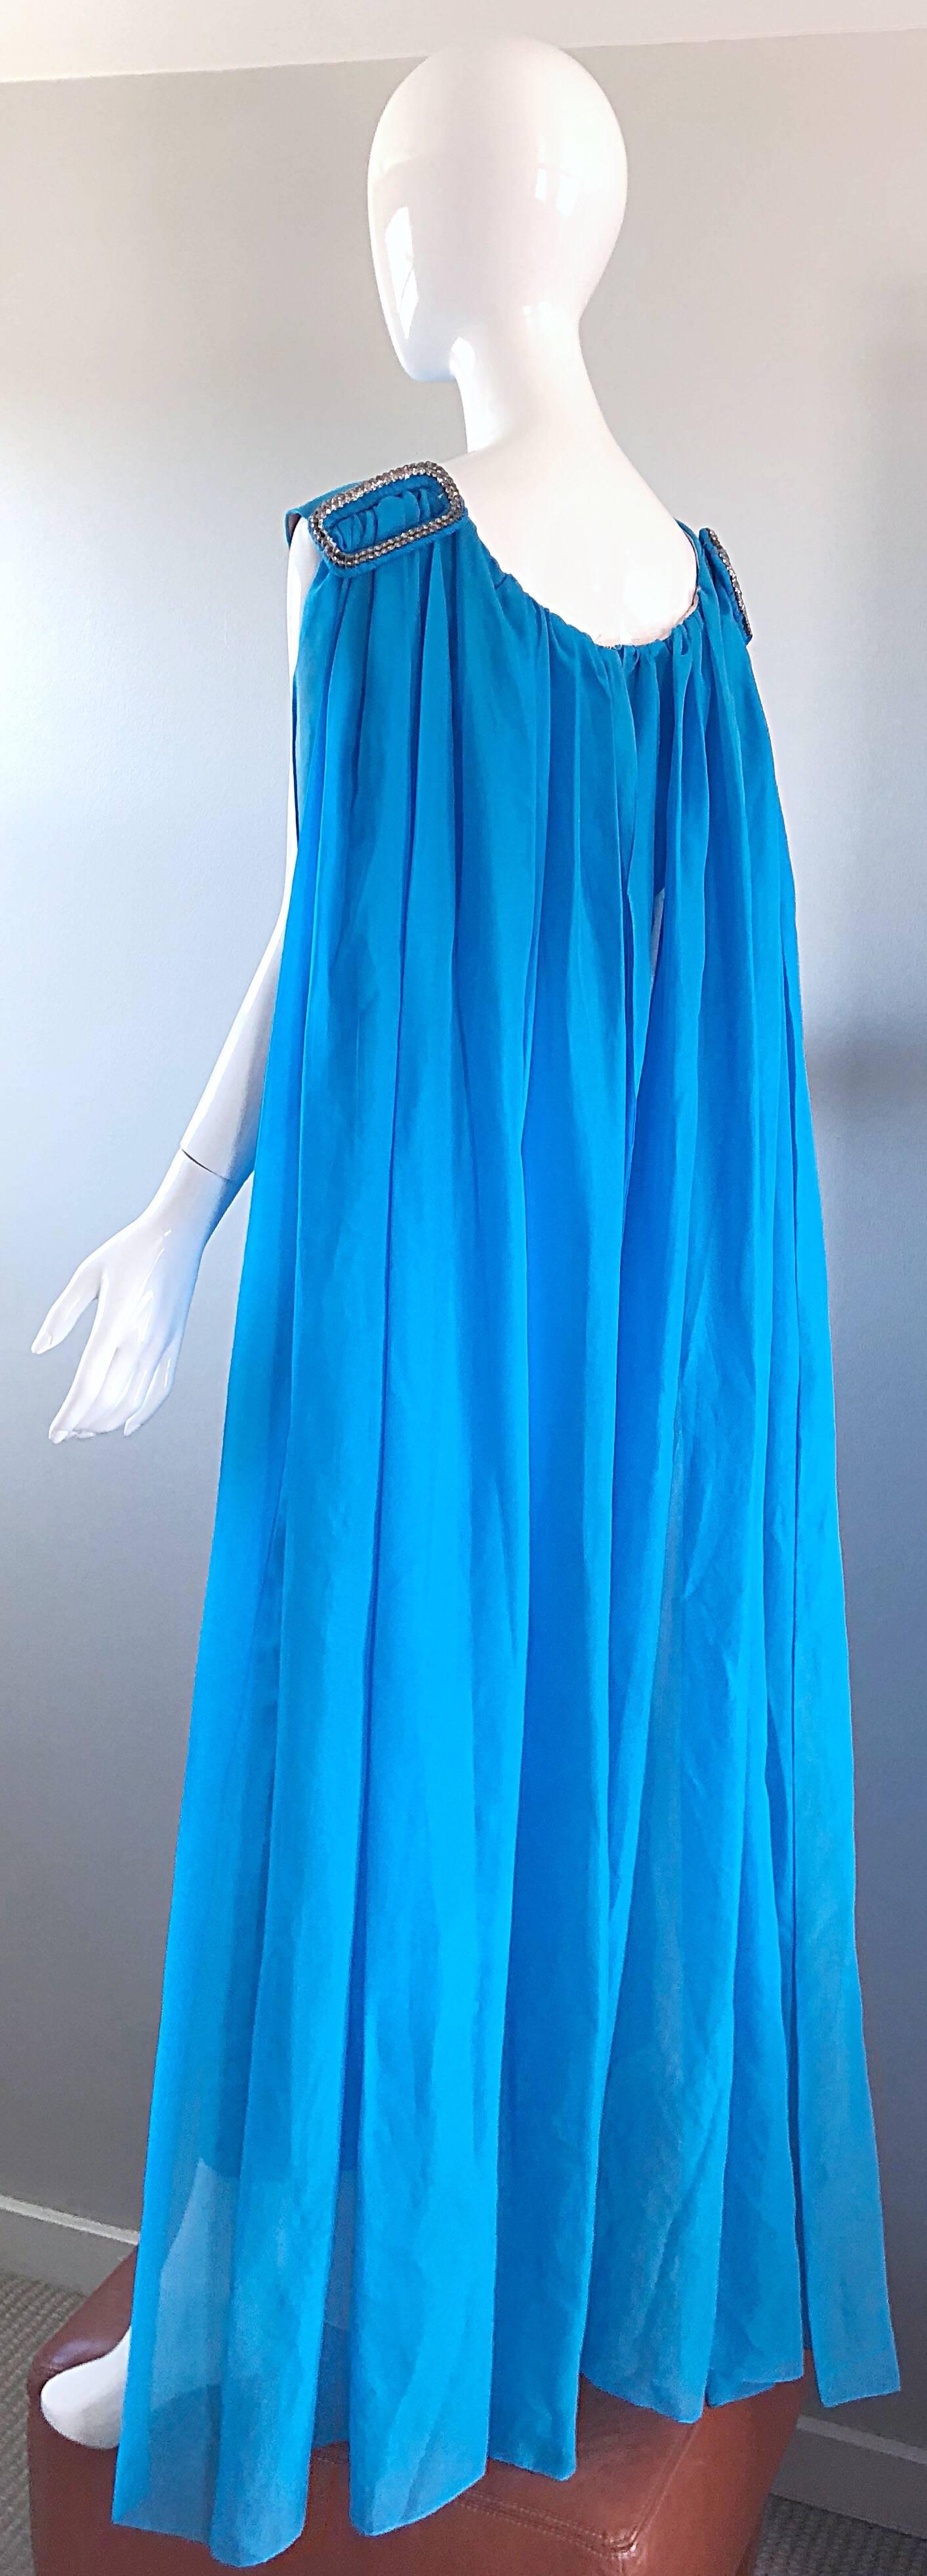 Women's Incredible 1960s Turquoise Blue Chiffon Rhinestone Encrusted Vintage Cape Gown